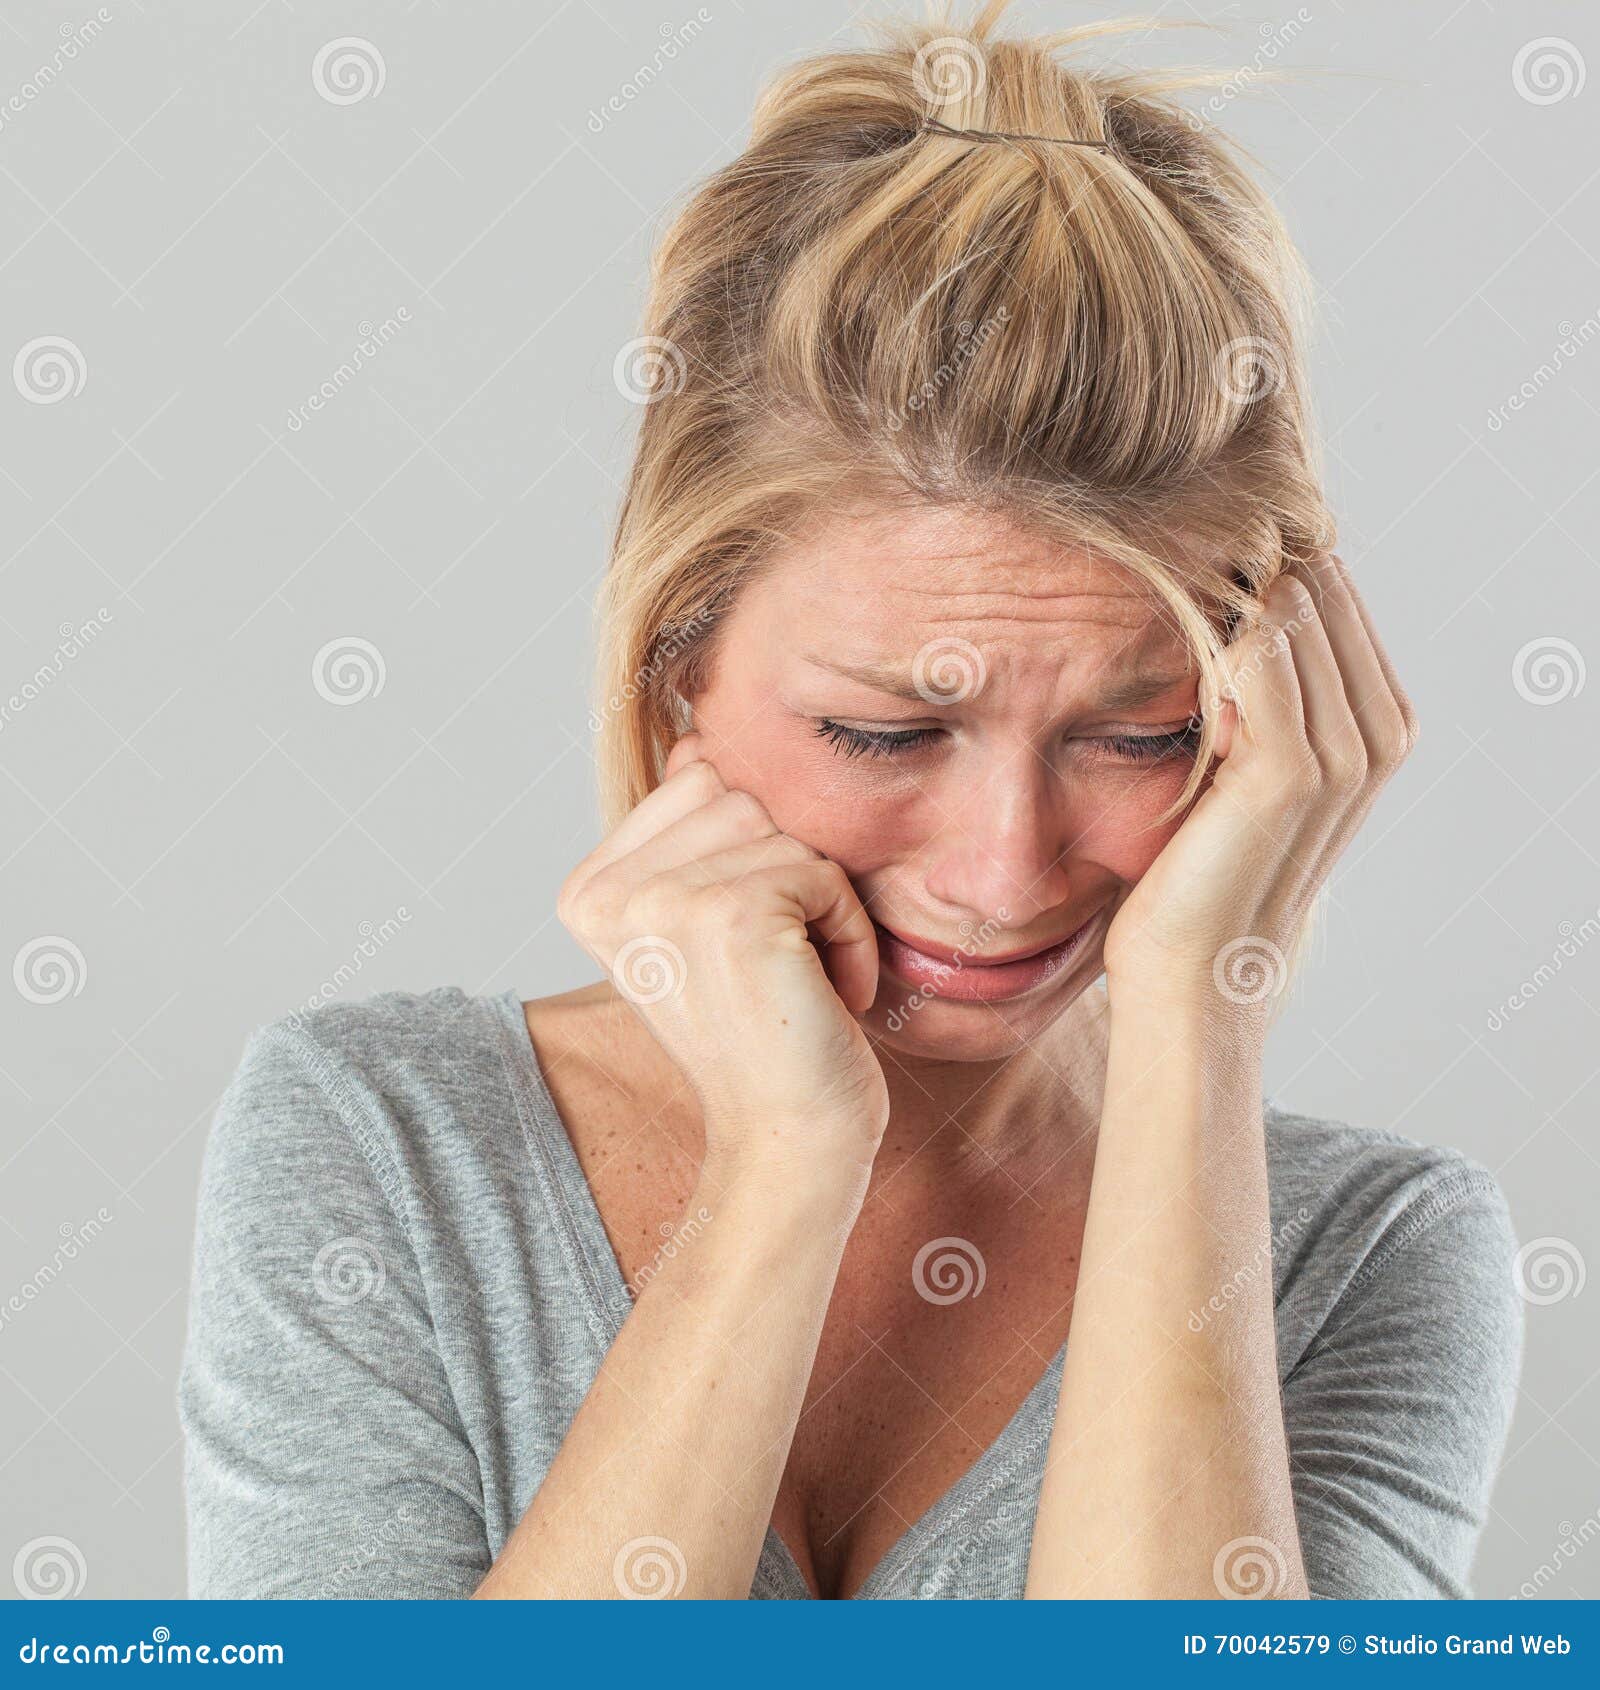 depressed woman in pain expressing regret and sadness